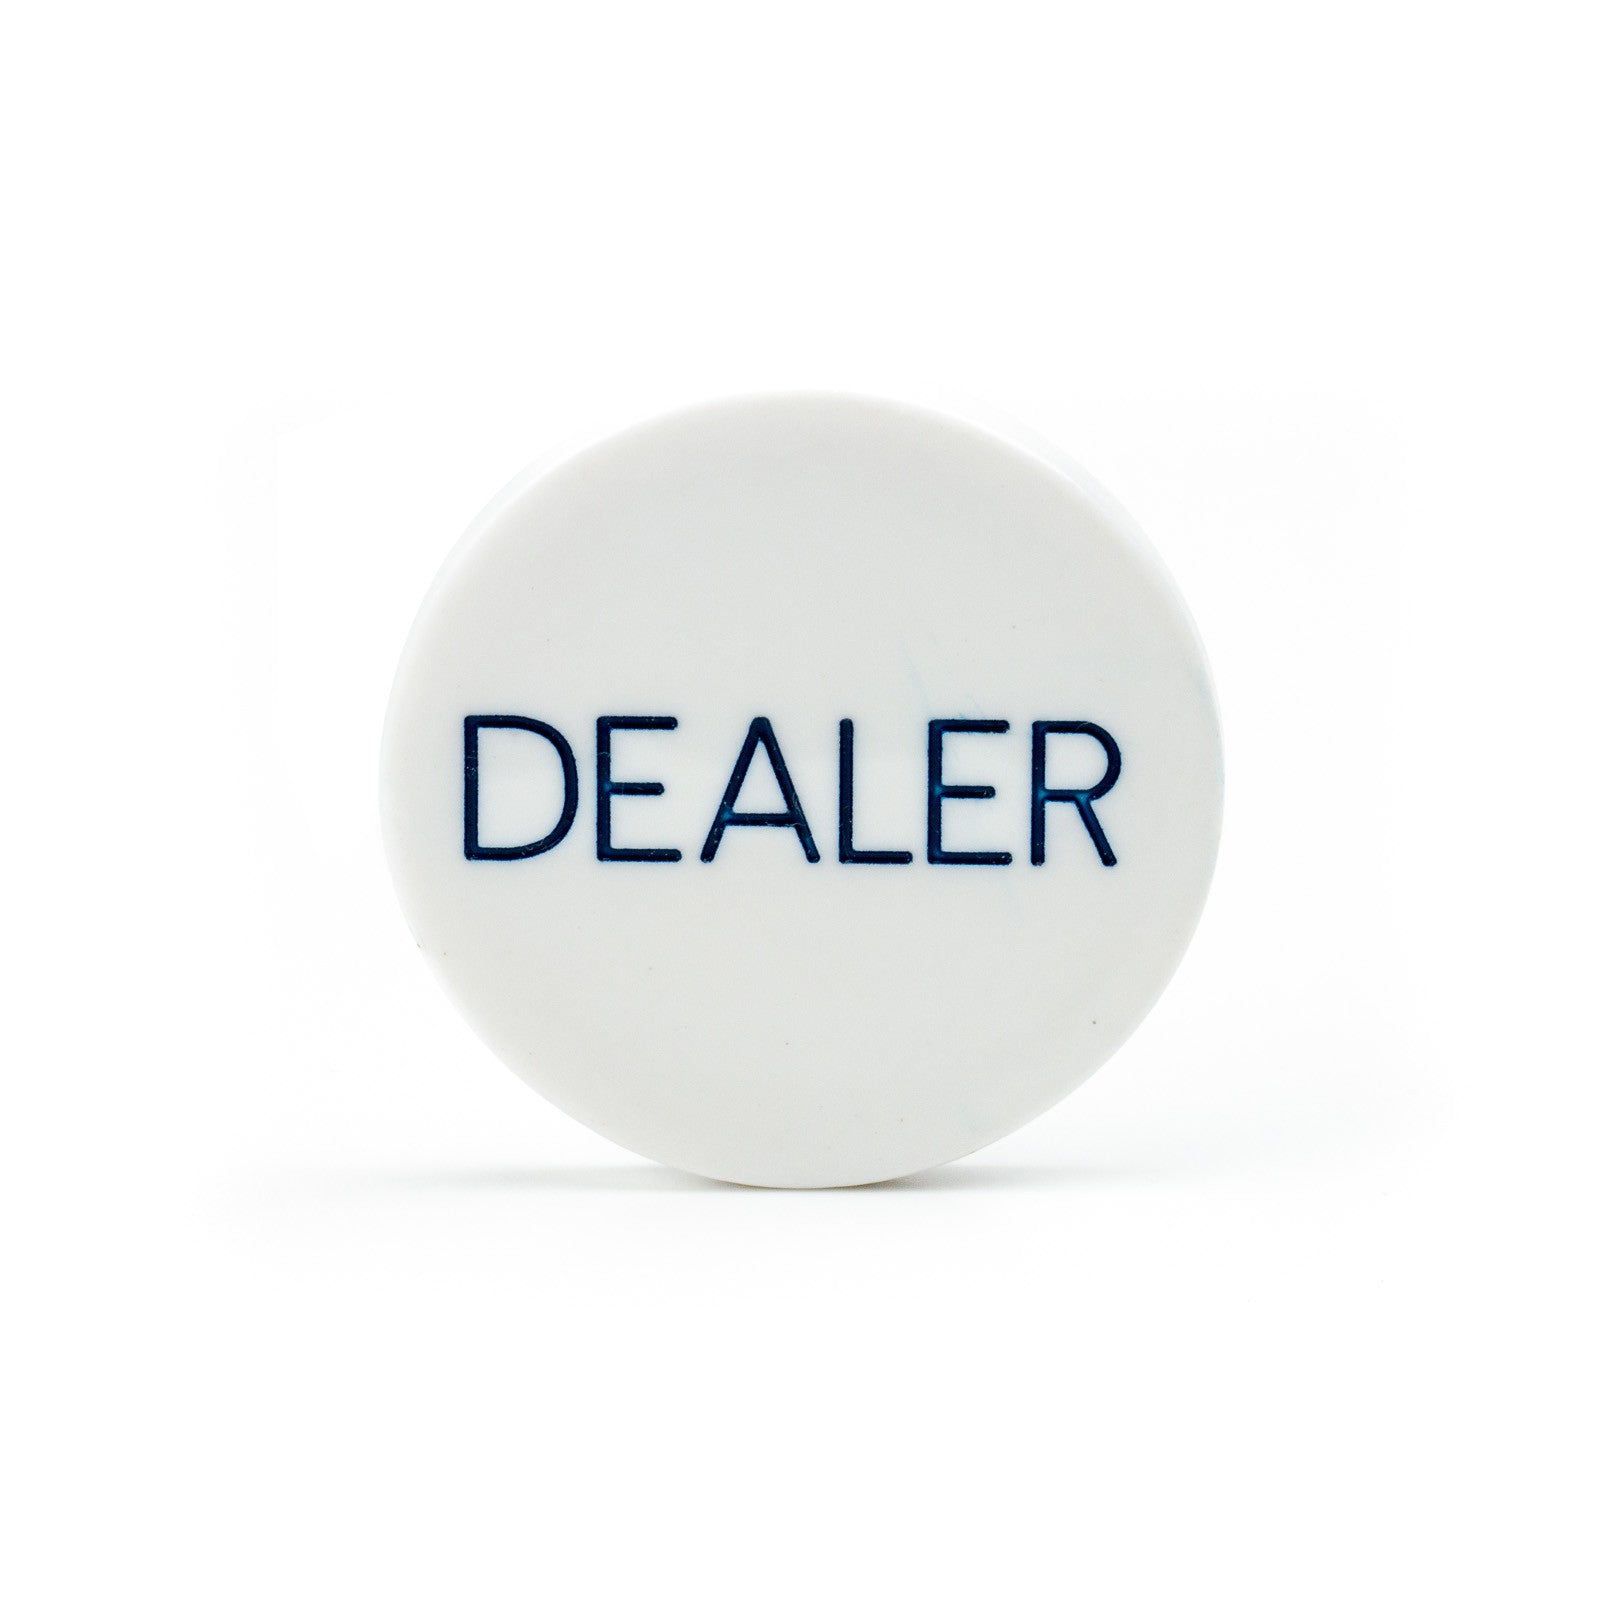 2 Inch Dealer Puck Engraved Casino Quality - Casino Supply